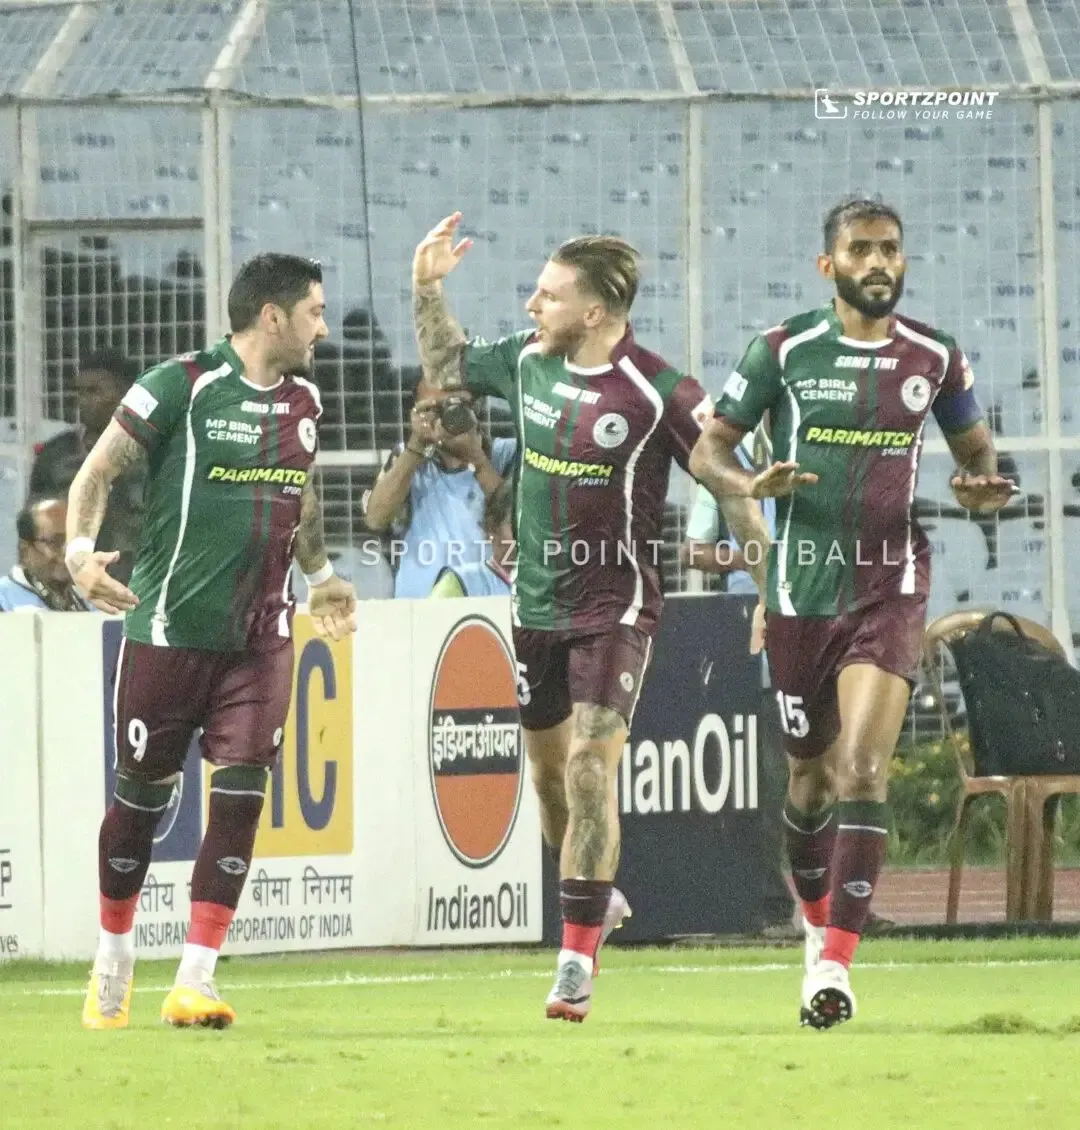 FC Goa vs Mohun Bagan Super Giant, Durand Cup semi-final: Jason Cummings after scoring the equaliser from the spot. | Sportz Point